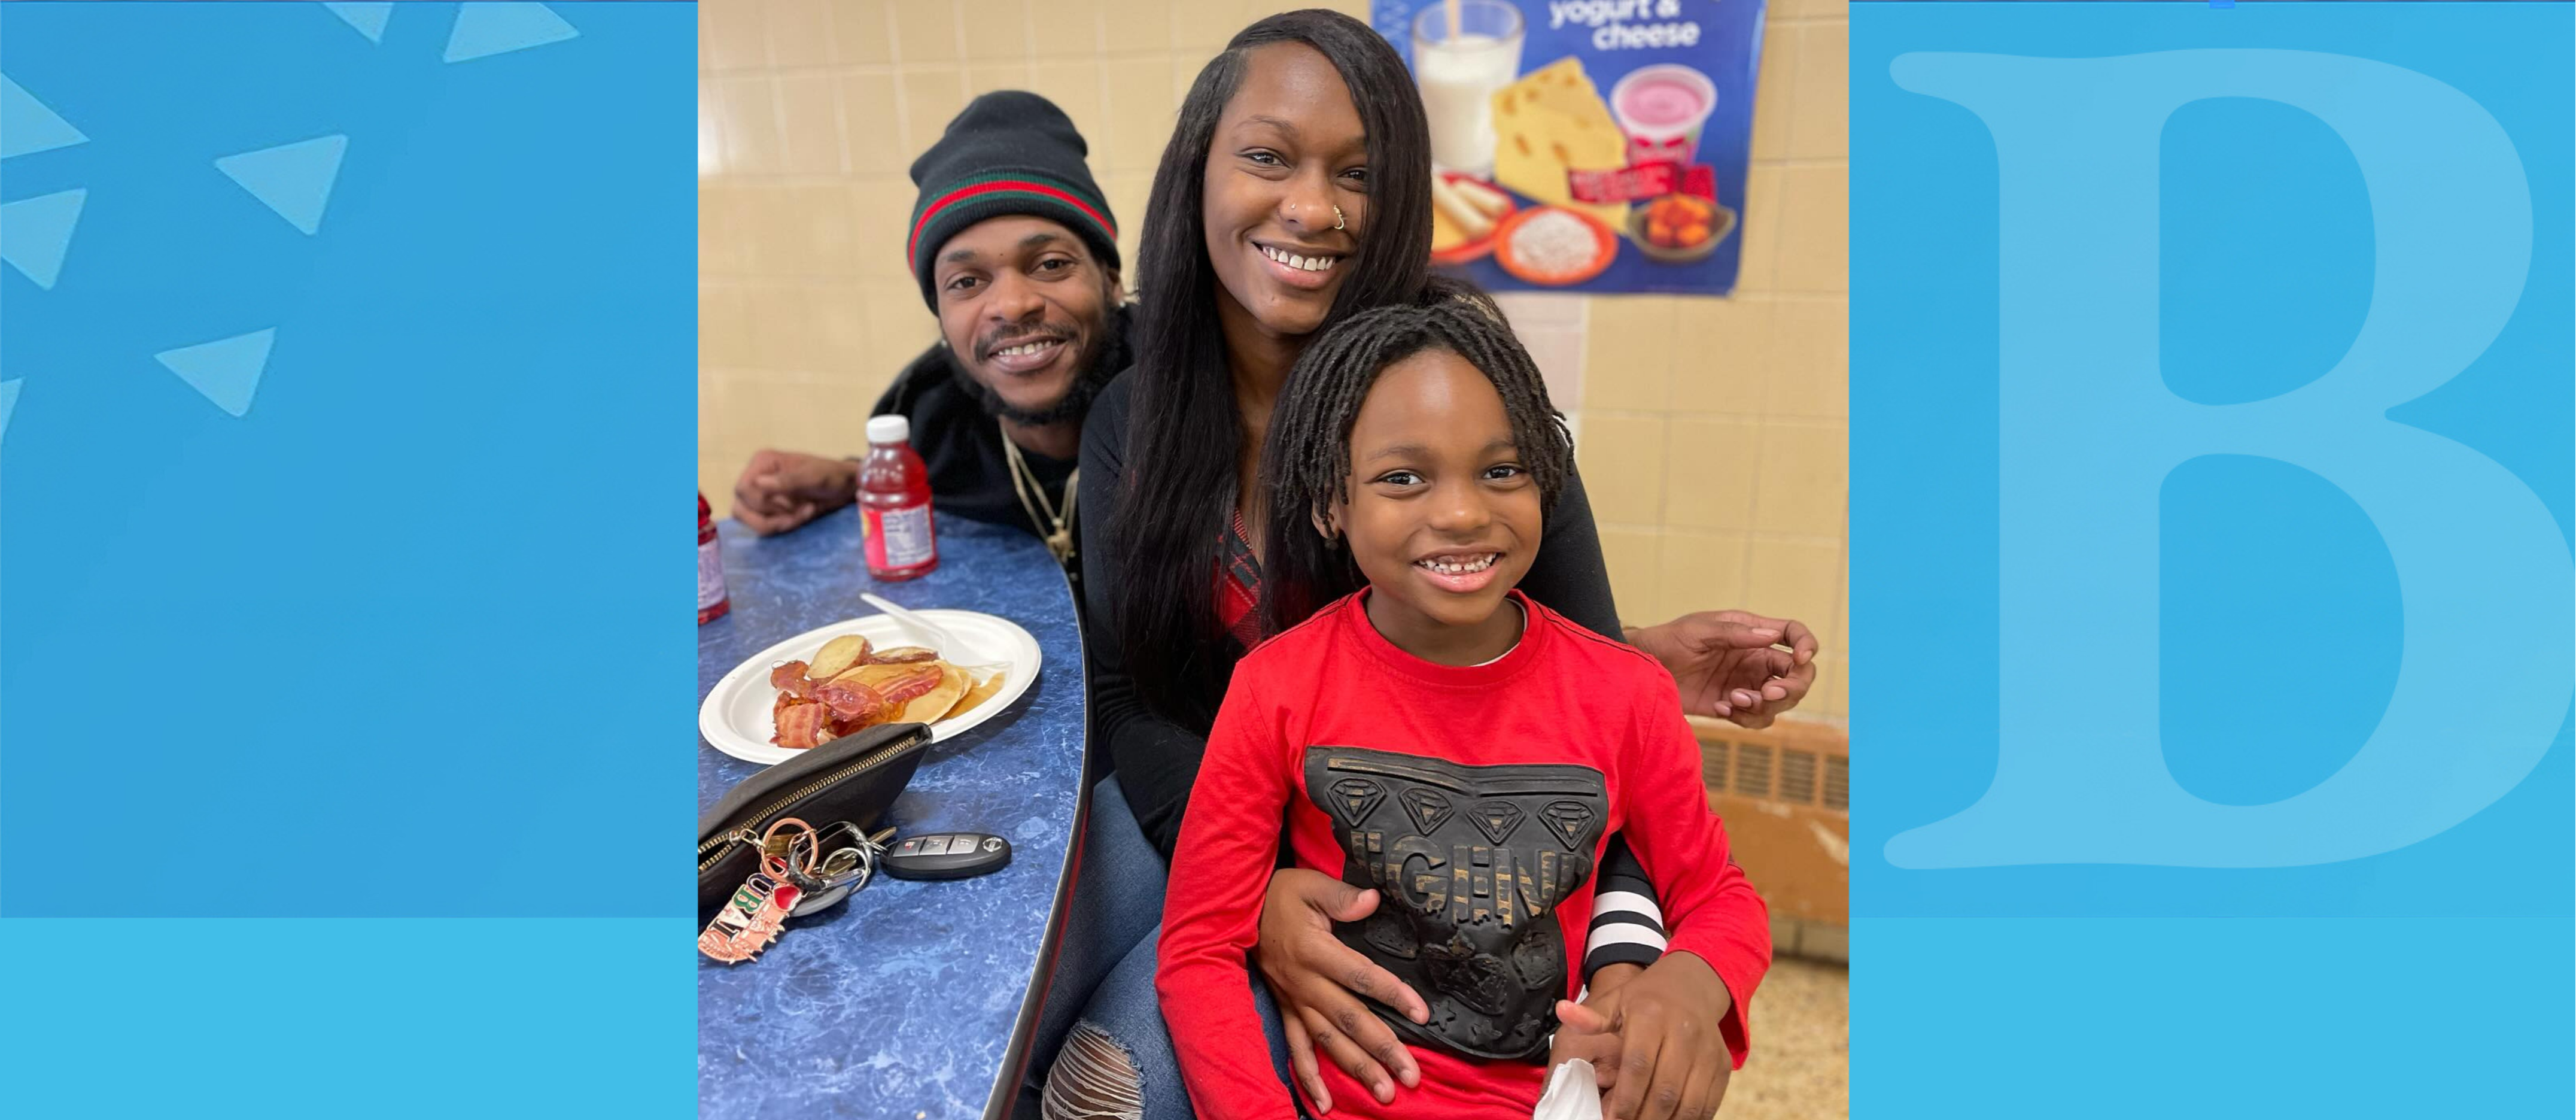 Student has lunch with his parents at school